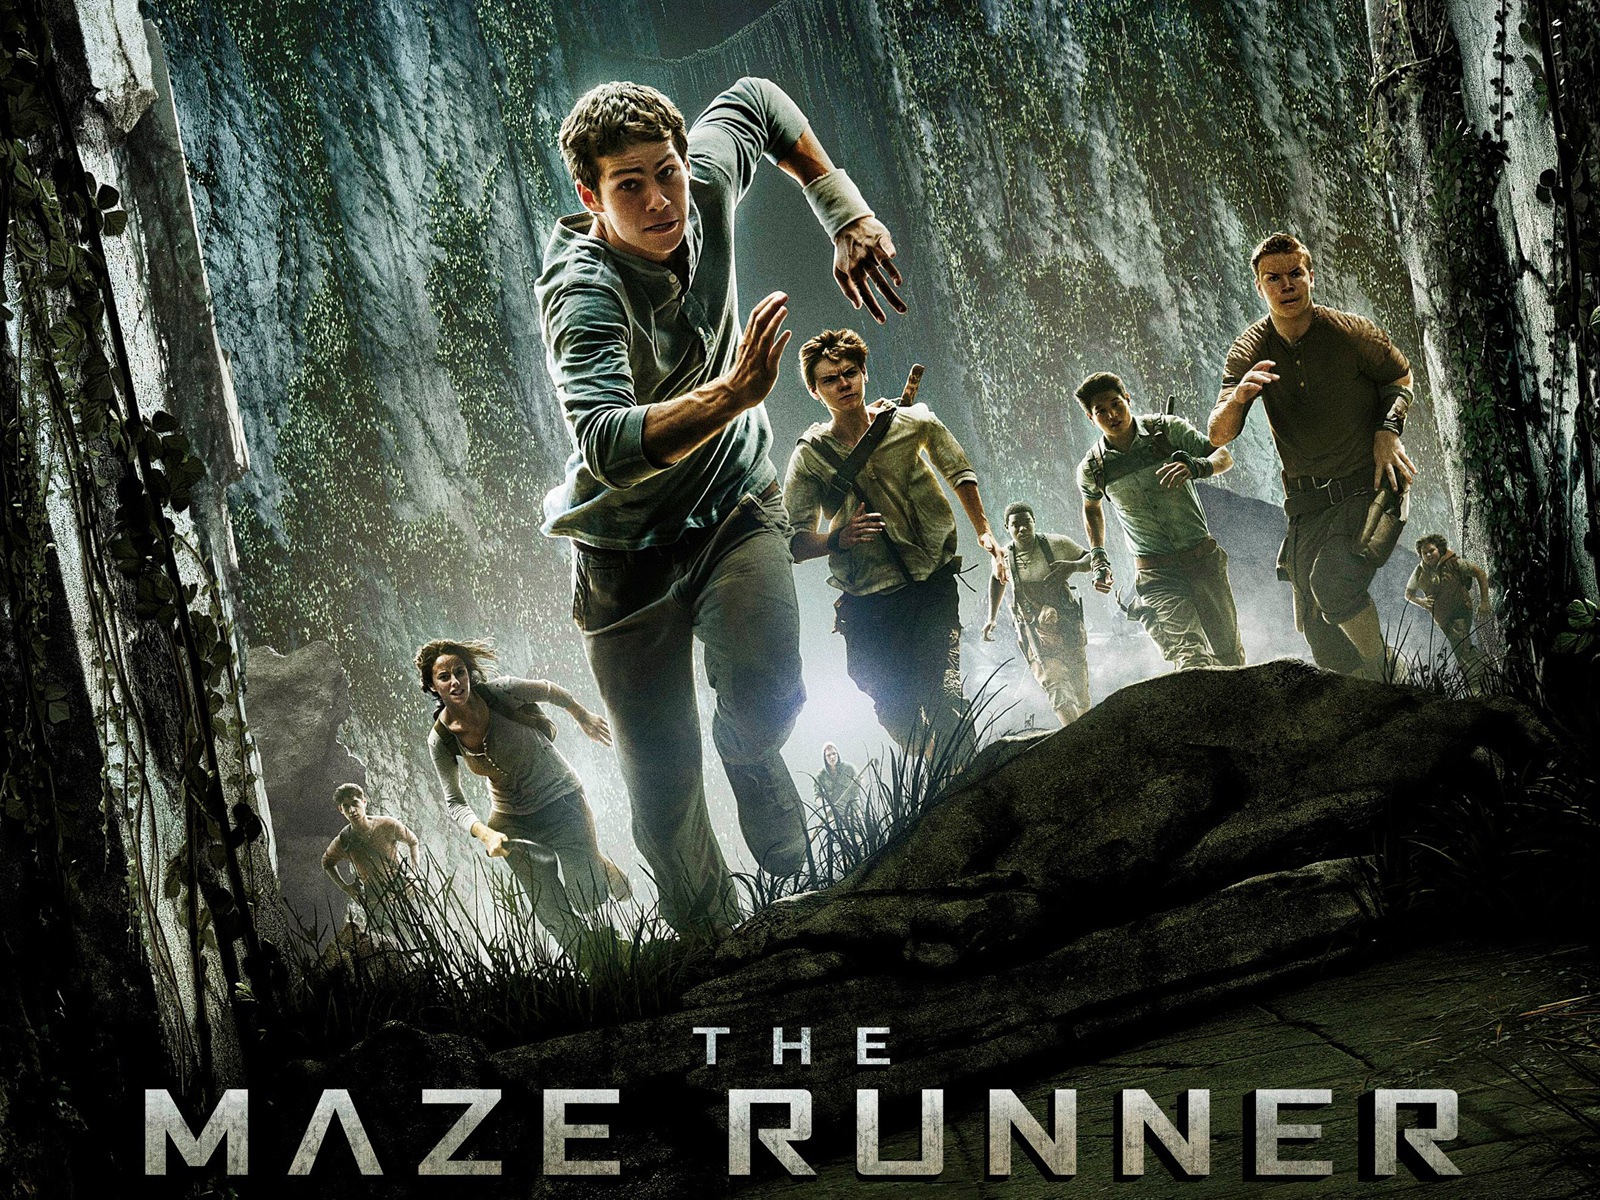 The Maze Runner HD movie wallpapers #2 - 1600x1200